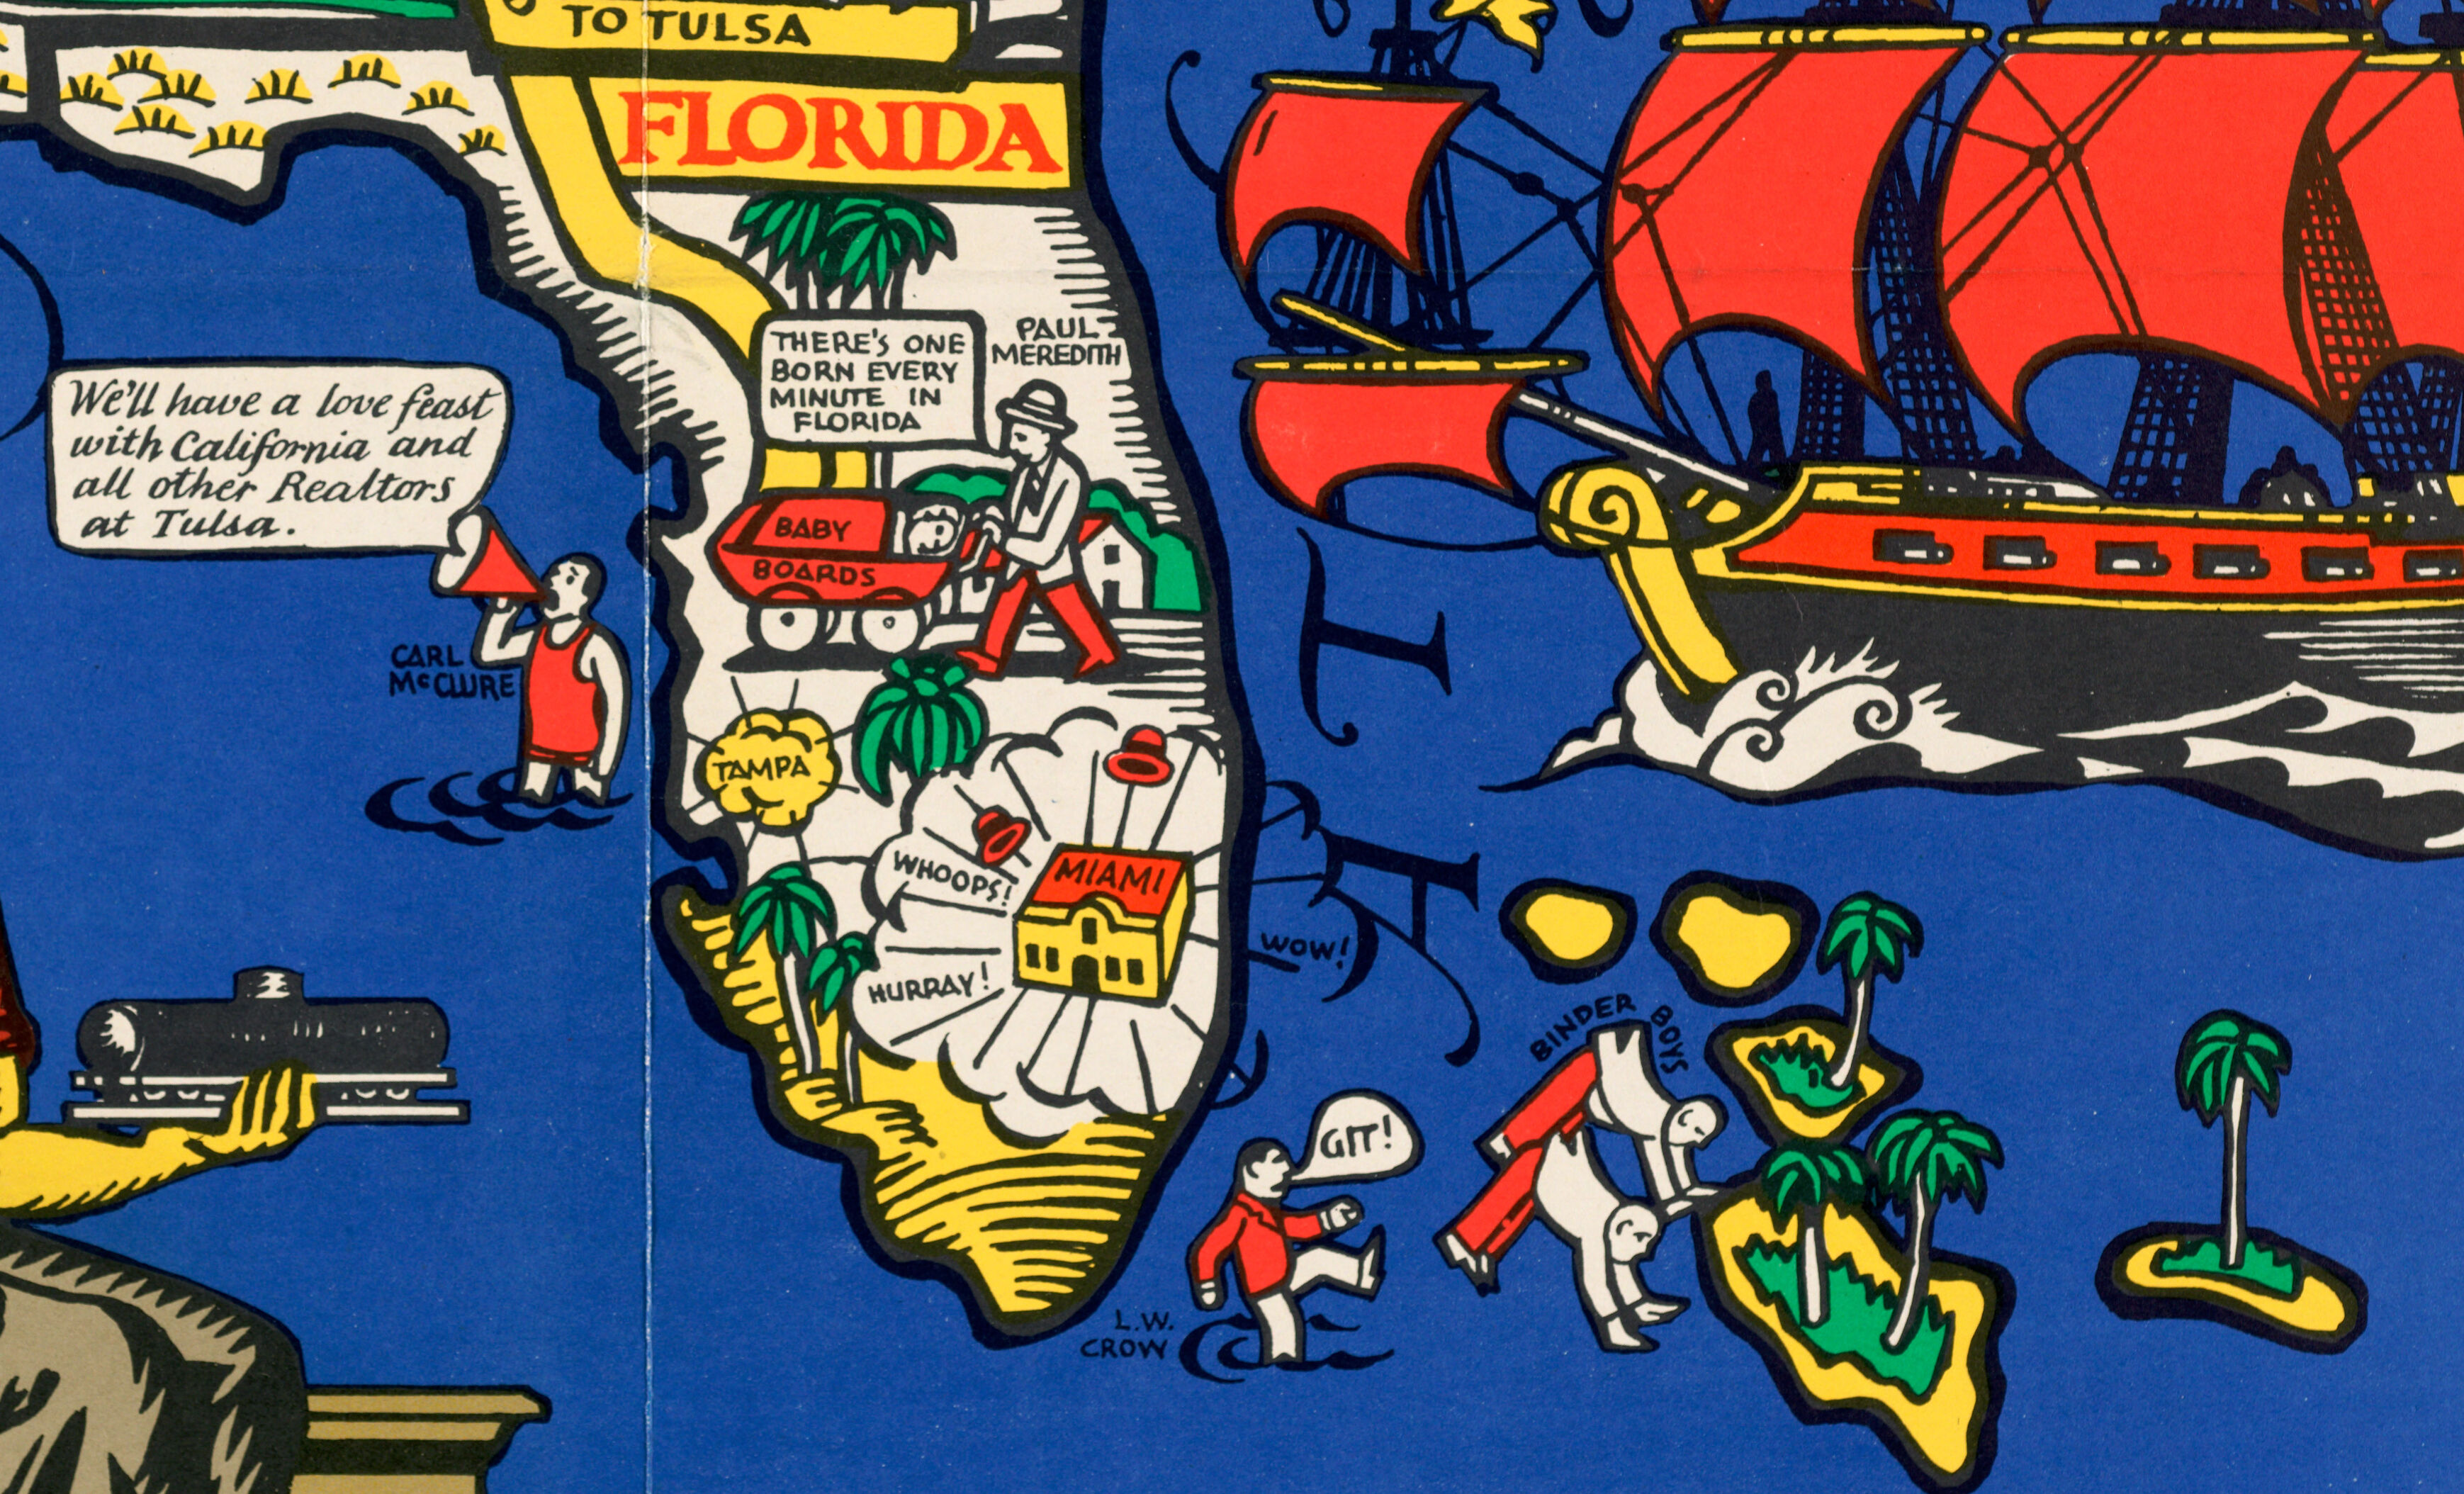 Florida and its environs as depicted on the NAREB map.